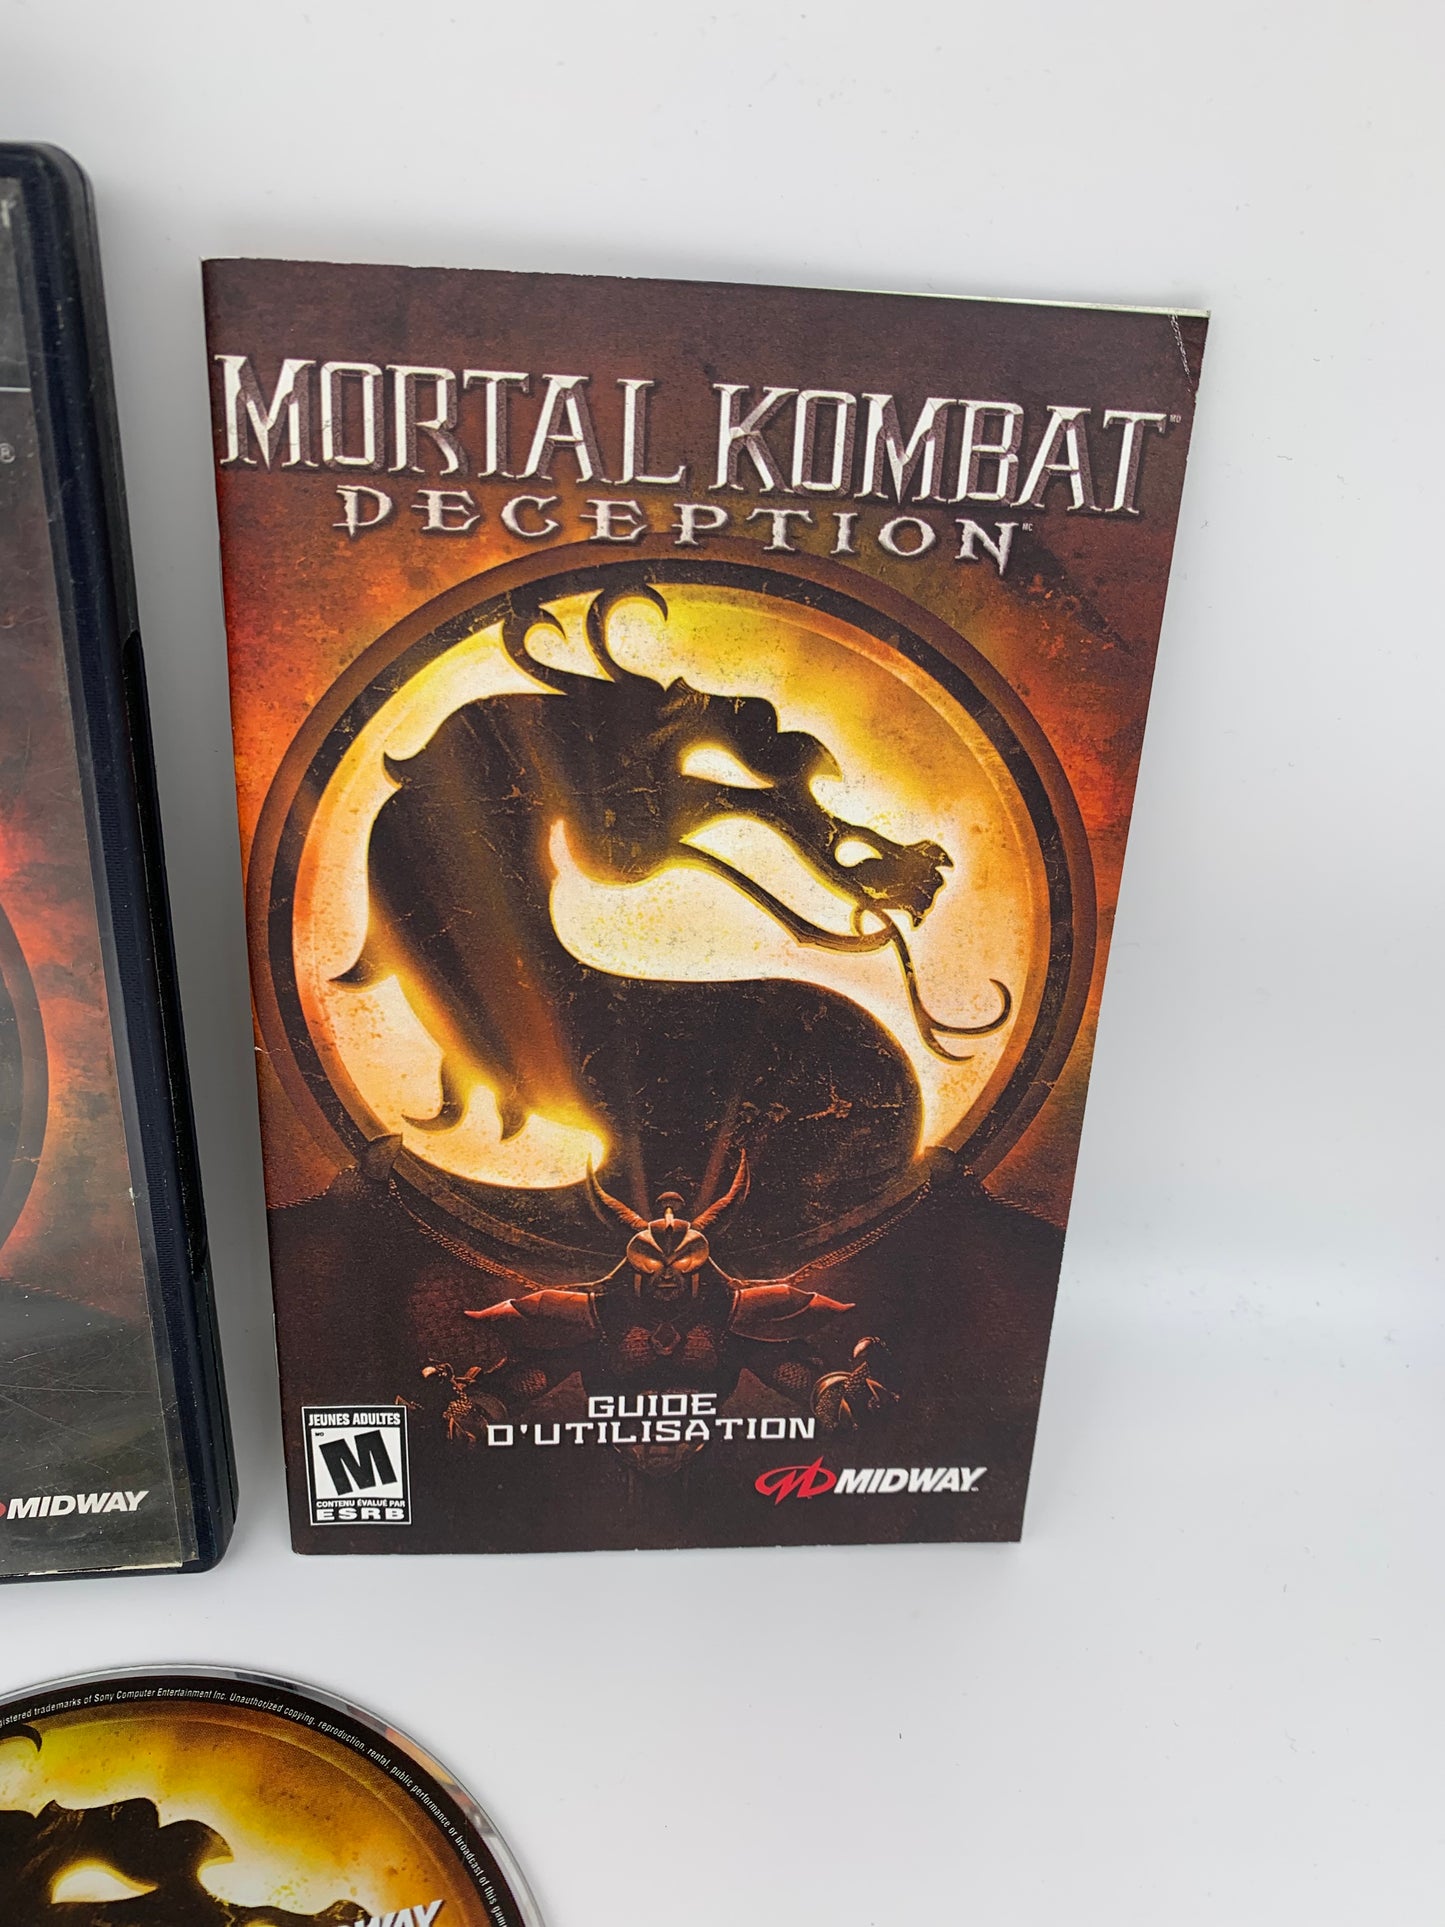 SONY PLAYSTATiON 2 [PS2] | MORTAL KOMBAT DISAPPOINTMENT